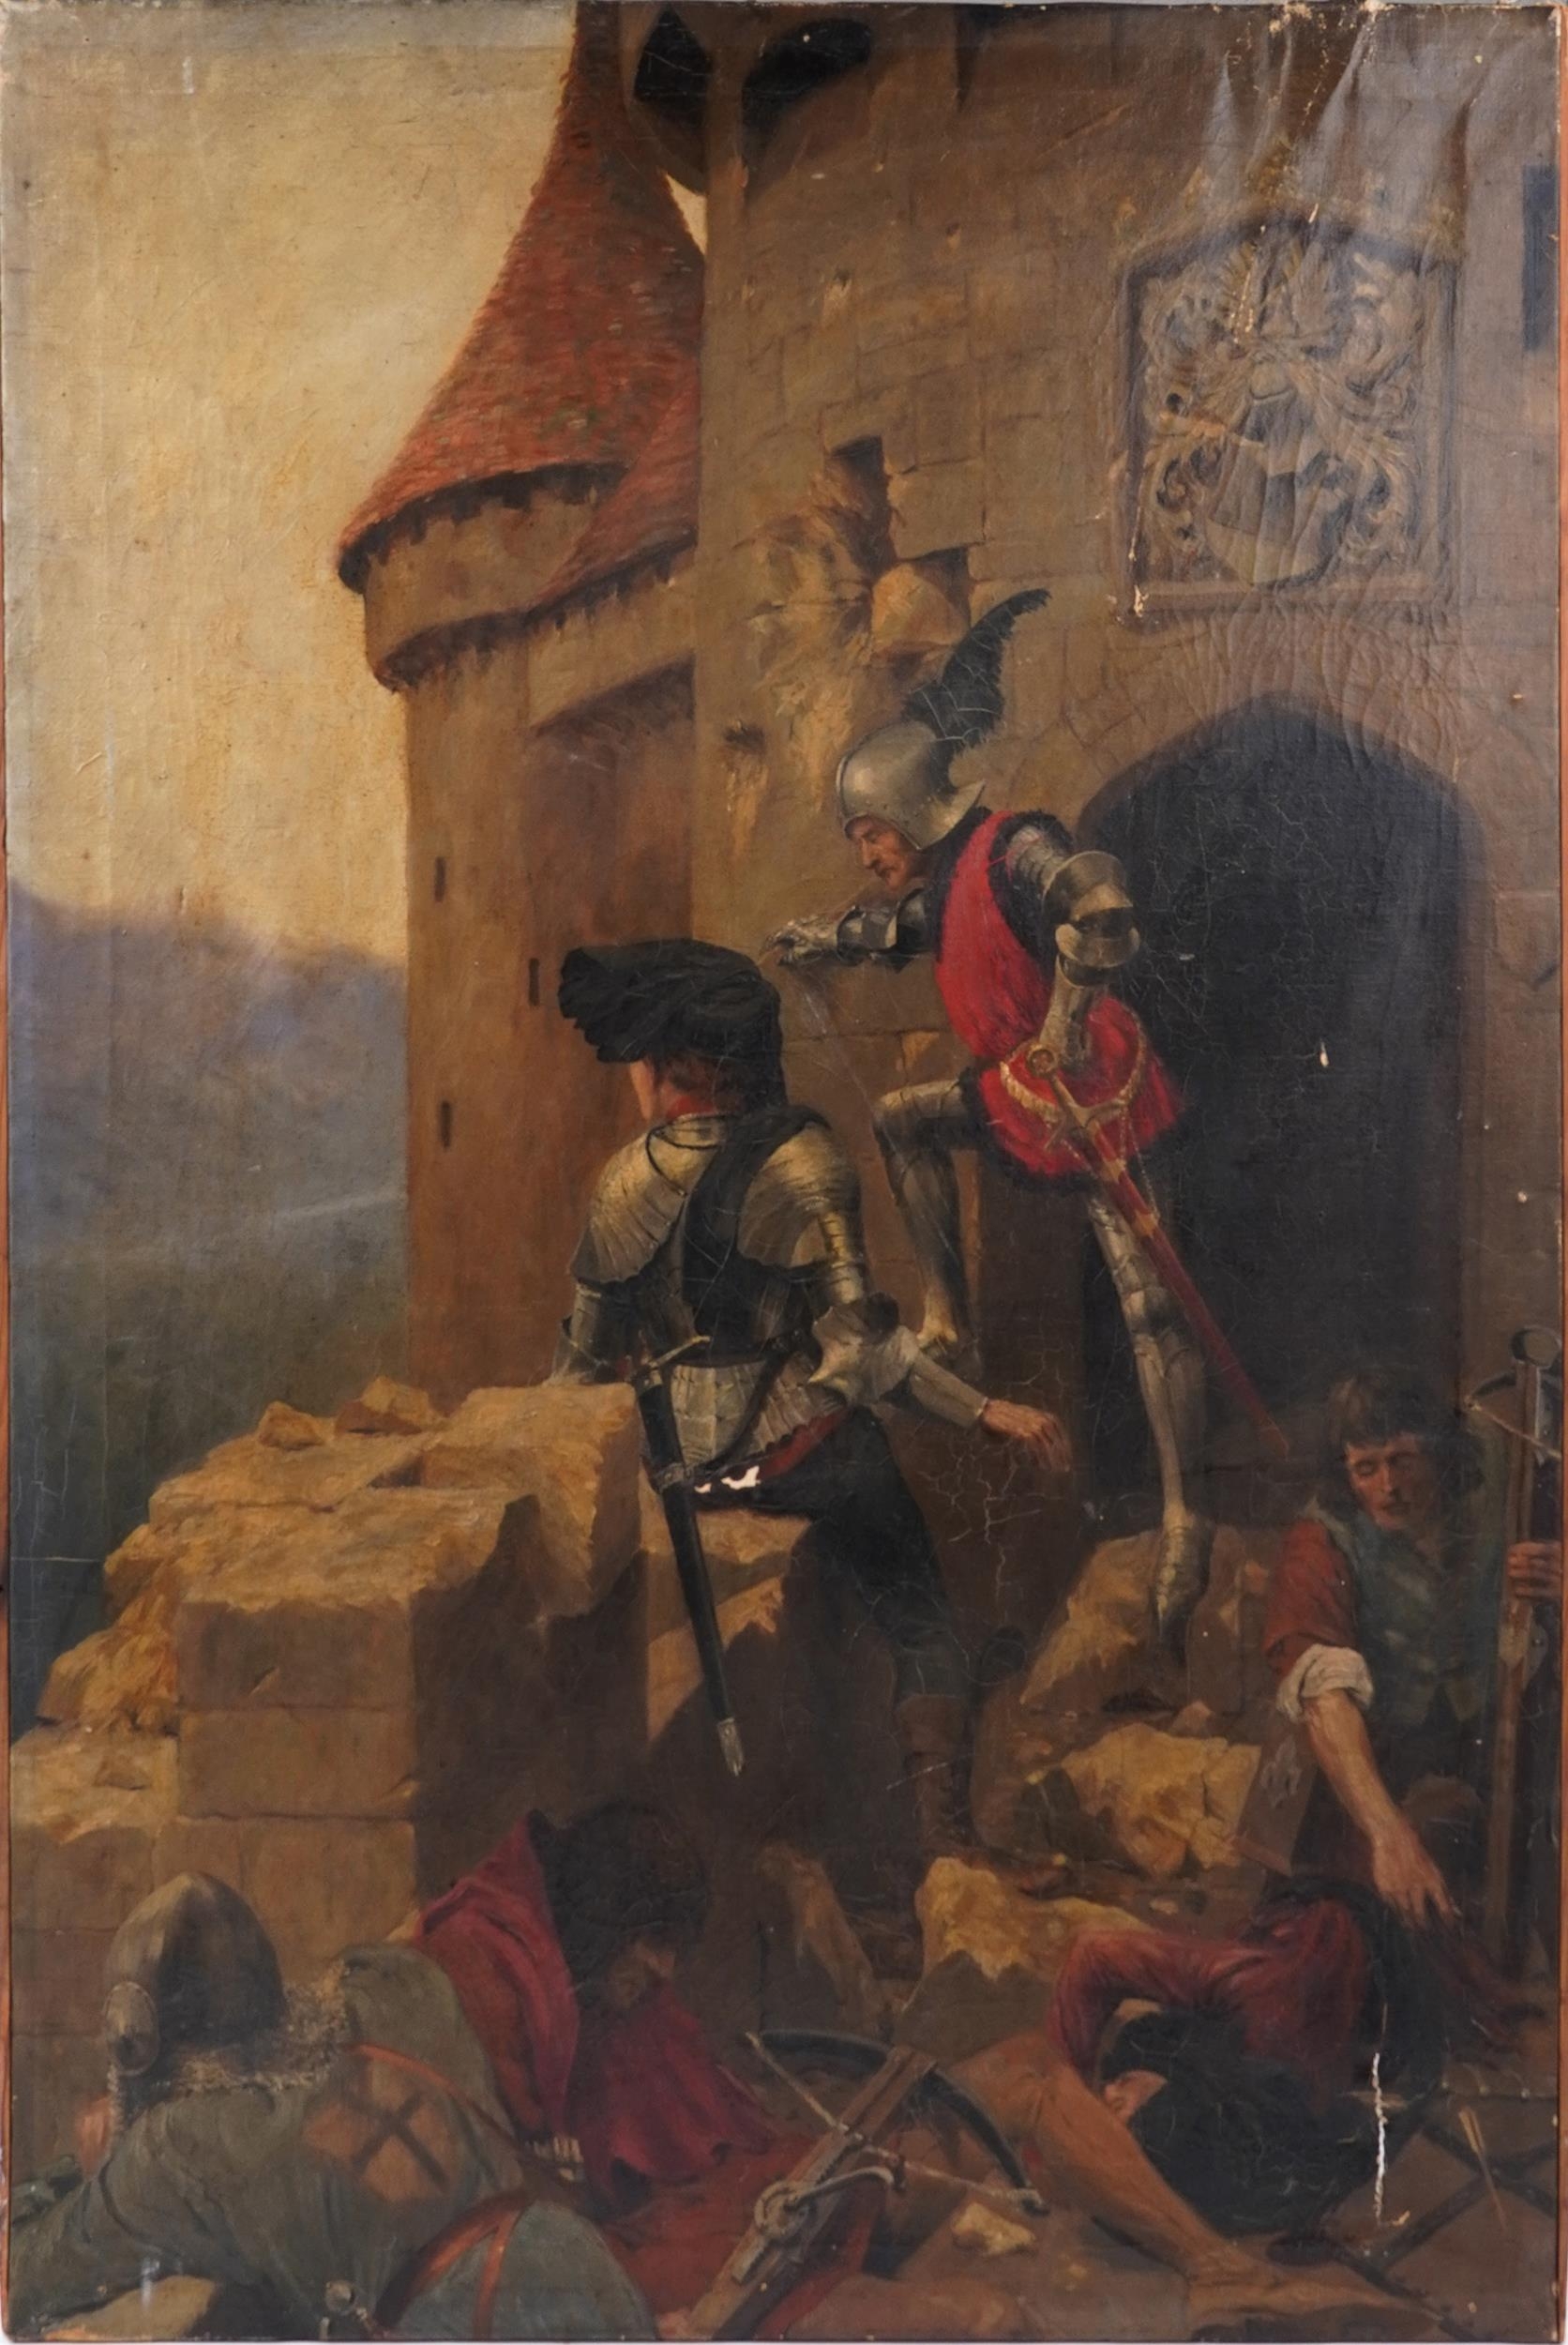 A C Woodville - Medieval knights with swords and crossbows, antique oil on canvas, unframed, 106cm x